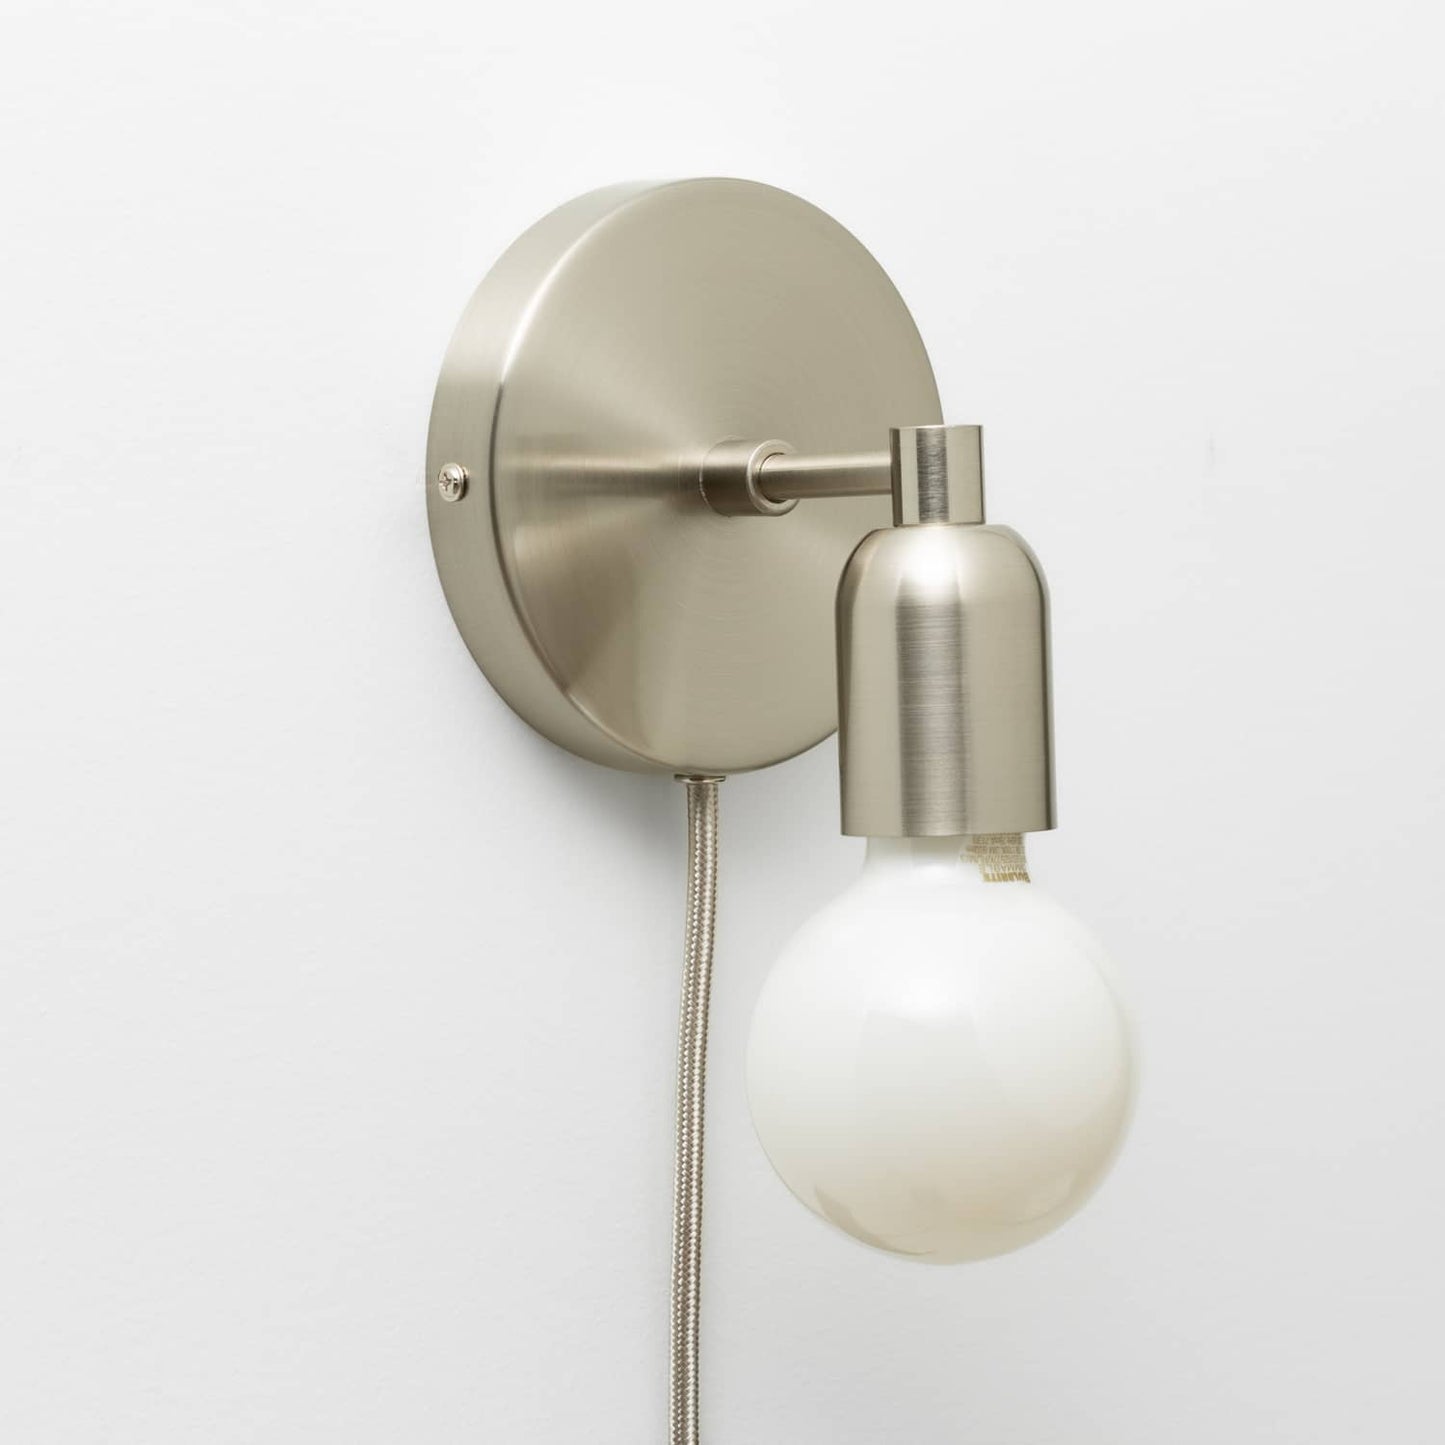 Junction Mini Solo Plug-In Sconce in Brushed Nickel finish pictured with G25 light bulb